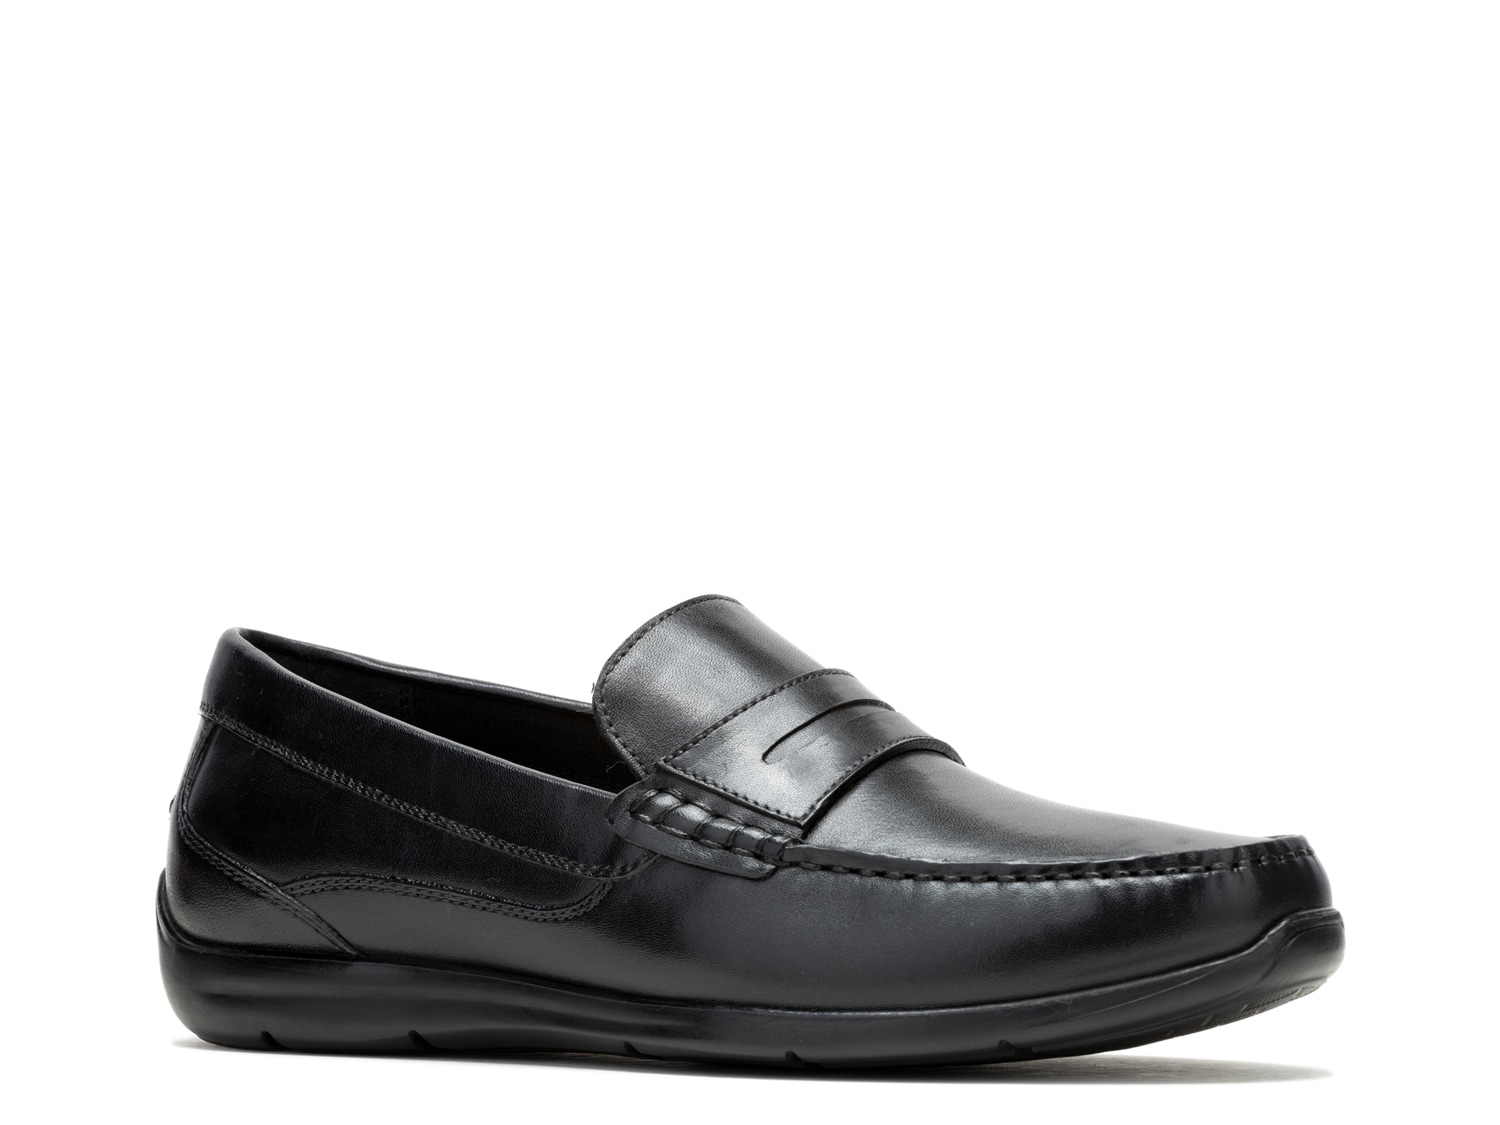 Hush Puppies Julian Driving Loafer - Free Shipping | DSW